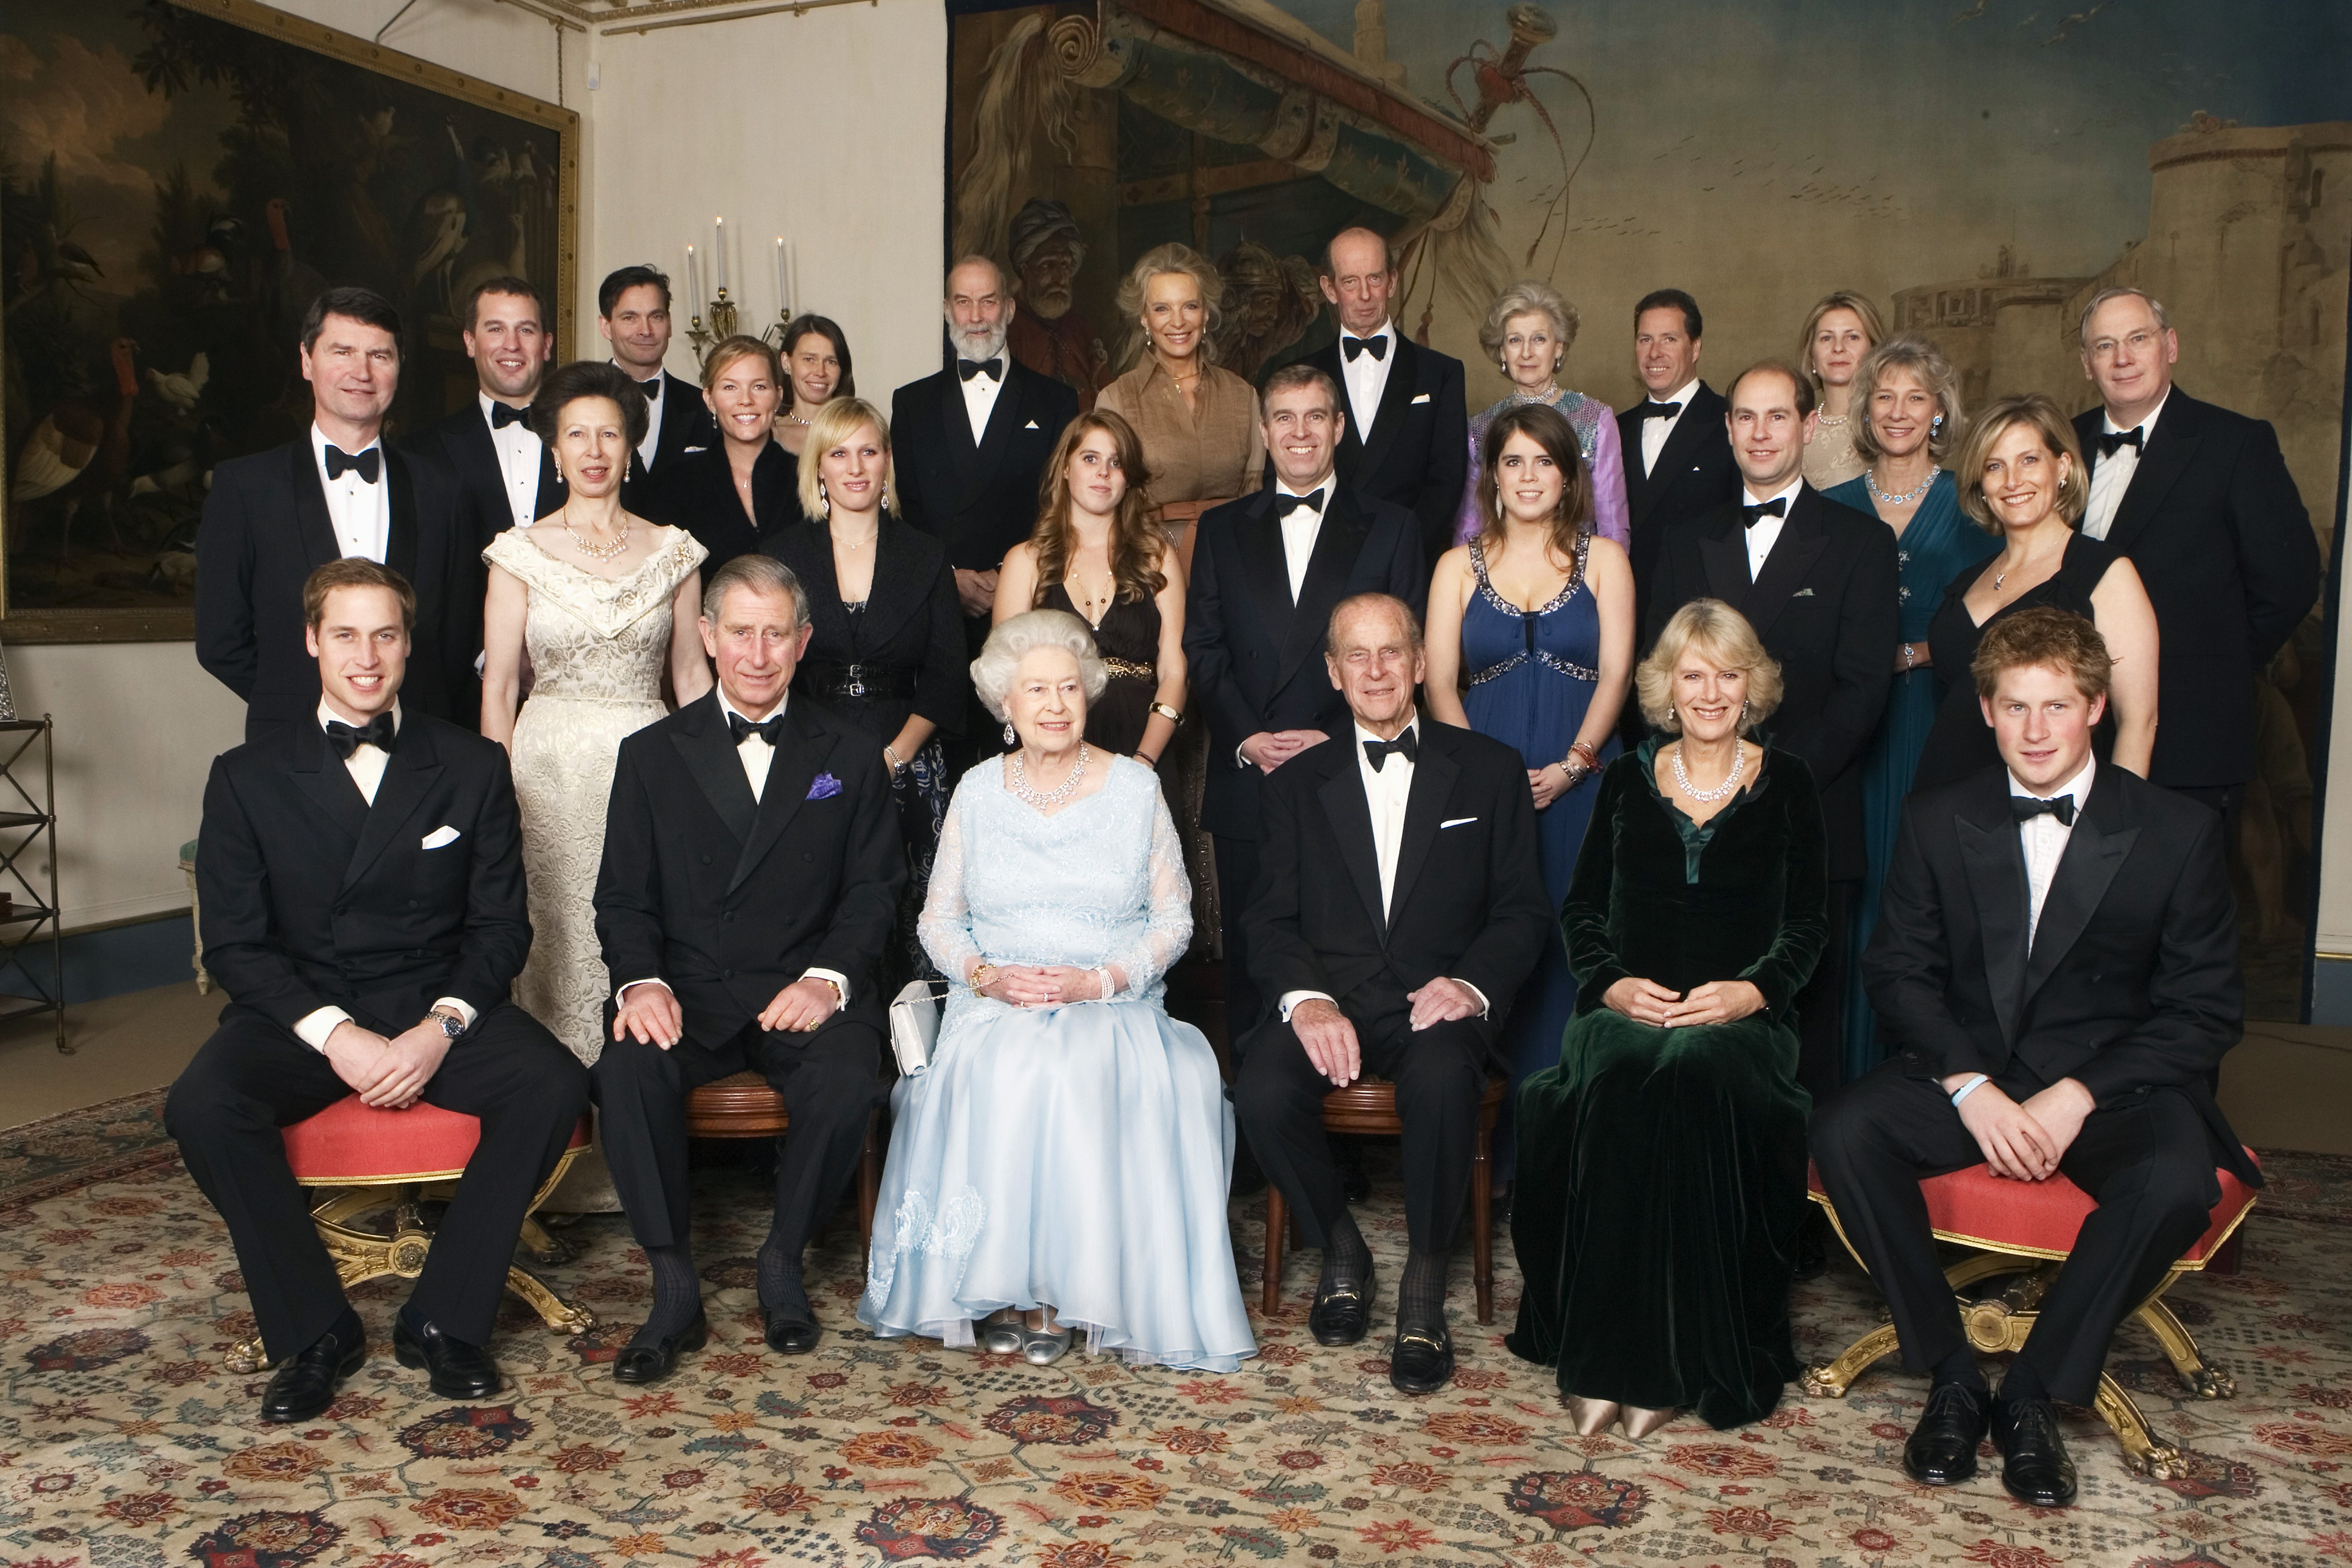 Queen Elizabeth II and Prince Philip, Duke of Edinburgh pictured with members of the Royal Family for a dinner in Clarence House on November 18, 2007 in London, England. / Source: Getty Images